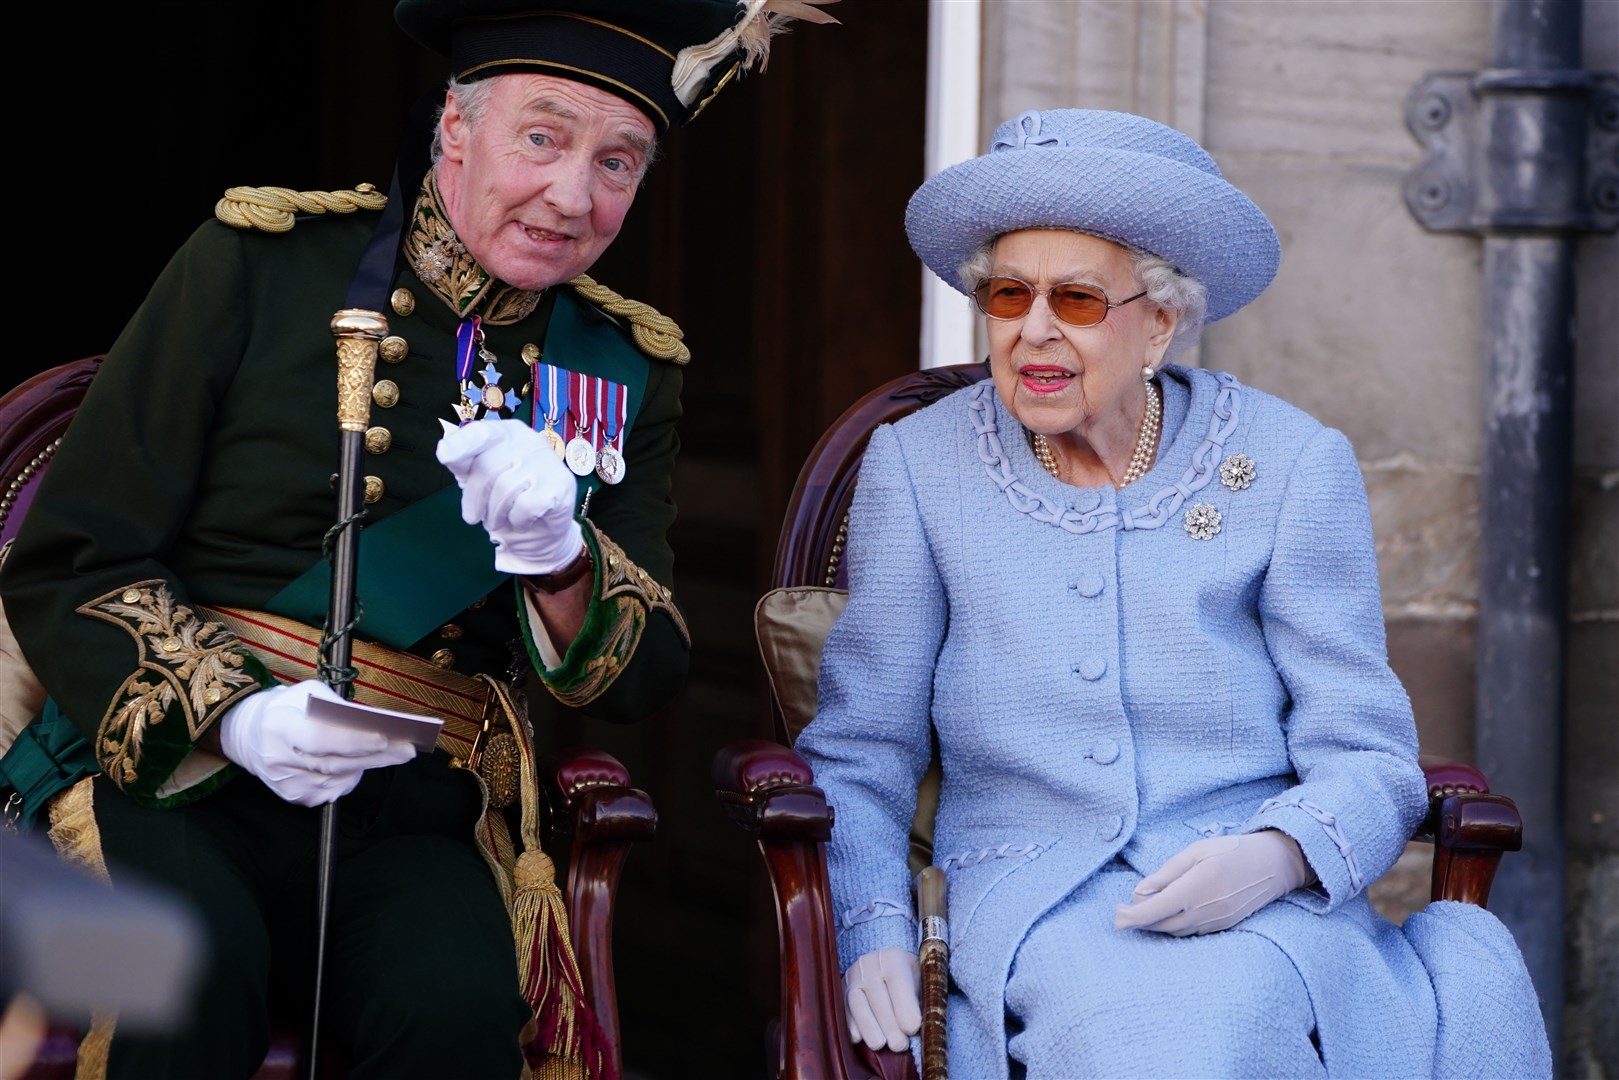 The Duke of Buccleuch pointed out a detail to the Queen at a parade for the Royal Company of Archers at Holyroodhouse, Edinburgh, in June (Jane Barlow/PA)